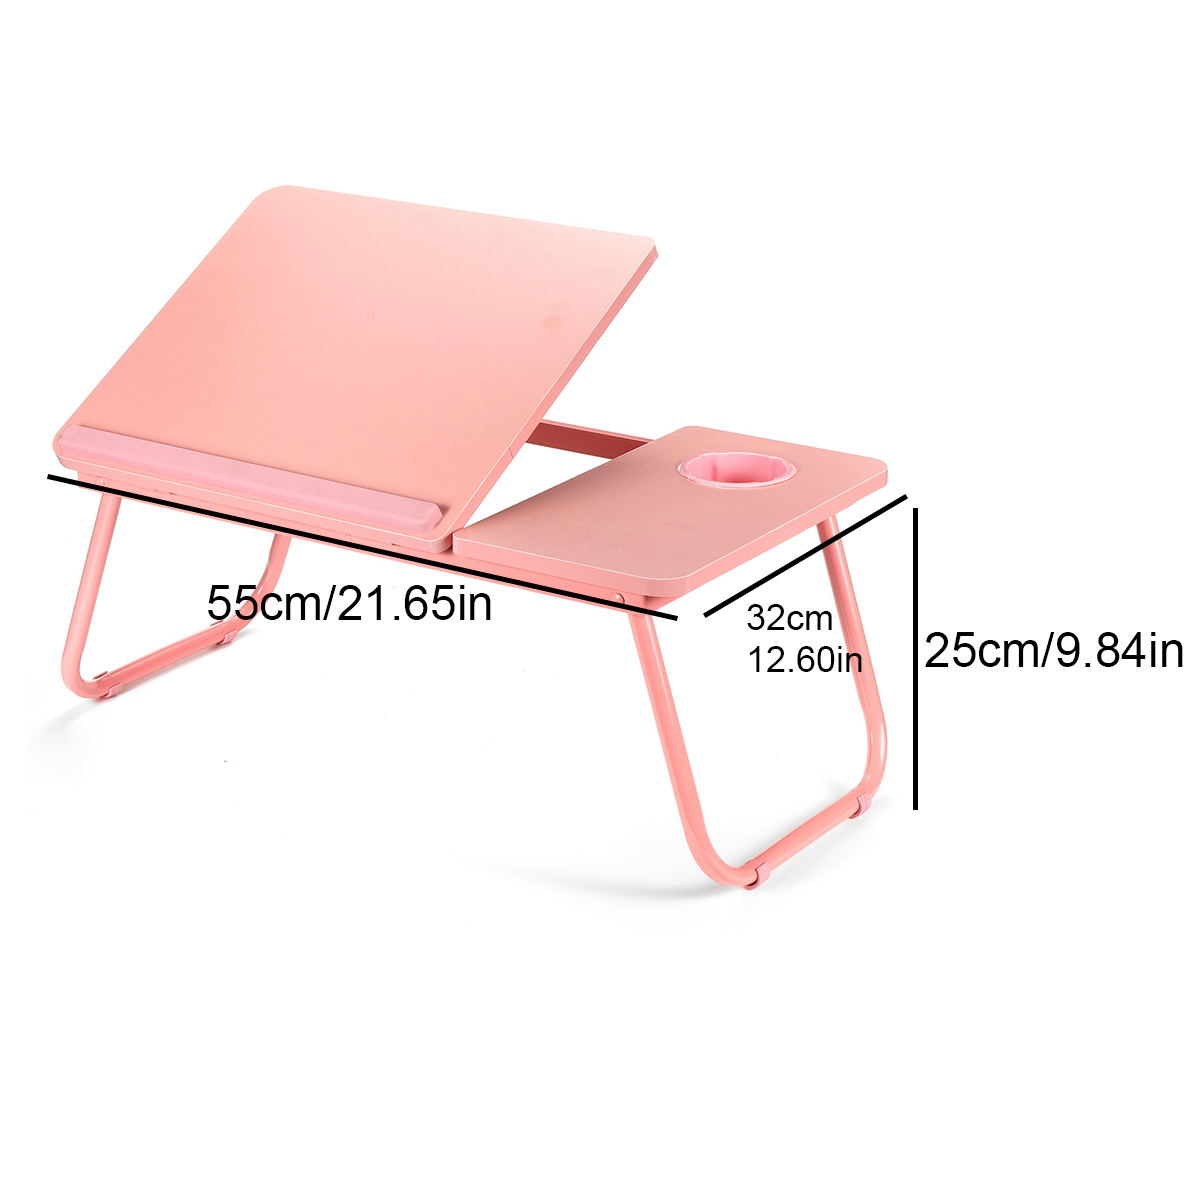 Liftable-Folding-Computer-Desk-Laptop-Stand-4-Heights-Adjustable-with-Cup-Holder-Lap-Bed-Table-Tray--1783876-6